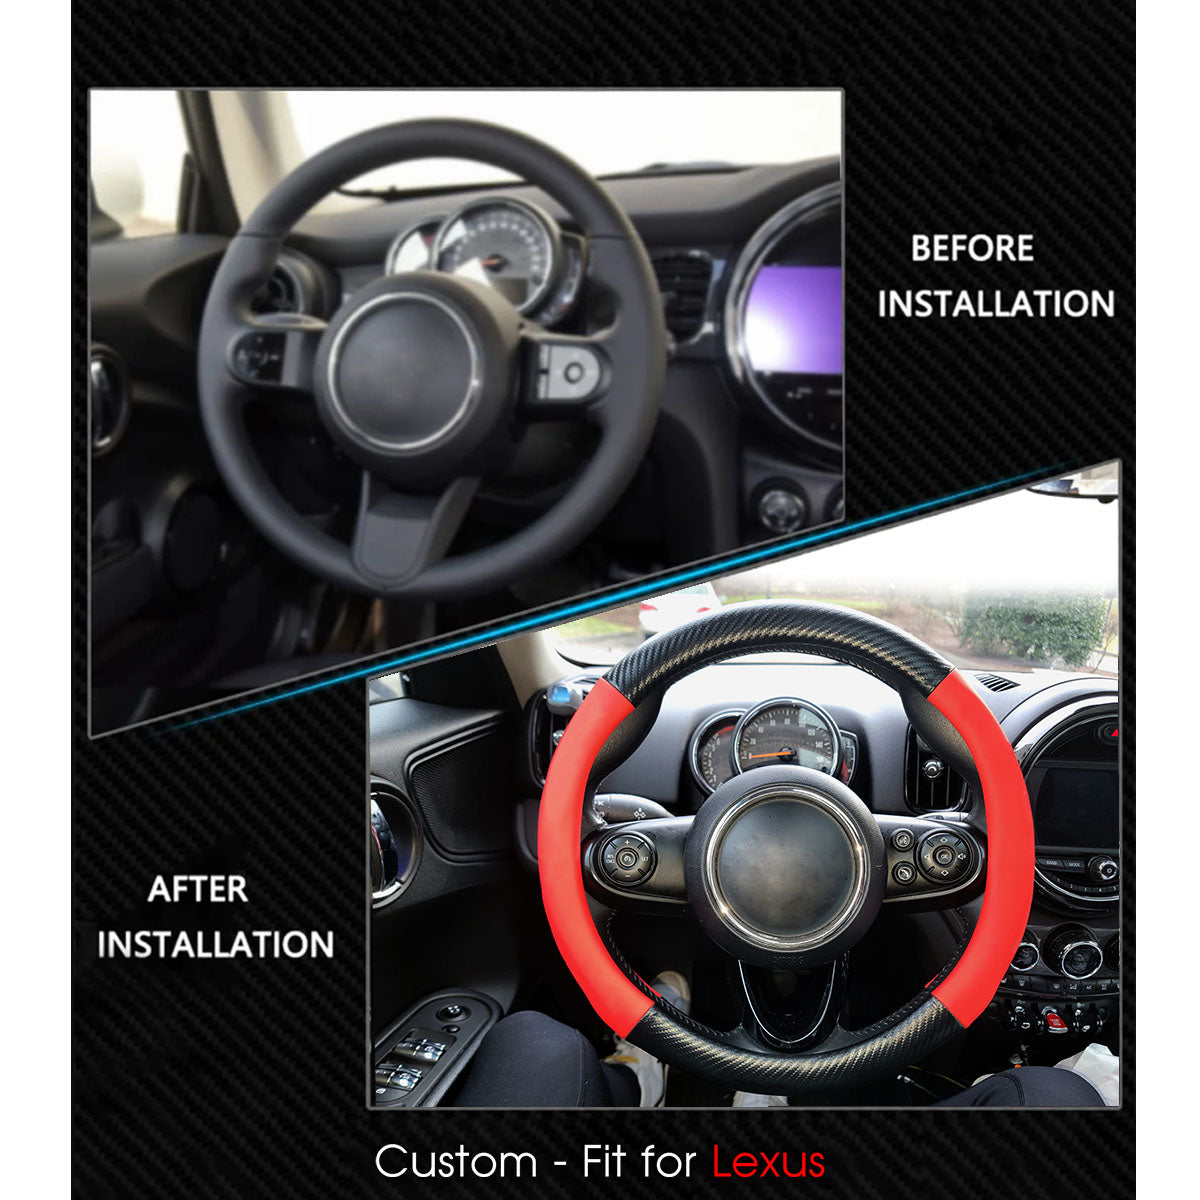 Car Steering Wheel Cover, Custom-Fit For Cars, Leather Nonslip 3D Carbon Fiber Texture Sport Style Wheel Cover for Women, Interior Modification for All Car Accessories DLFJ225